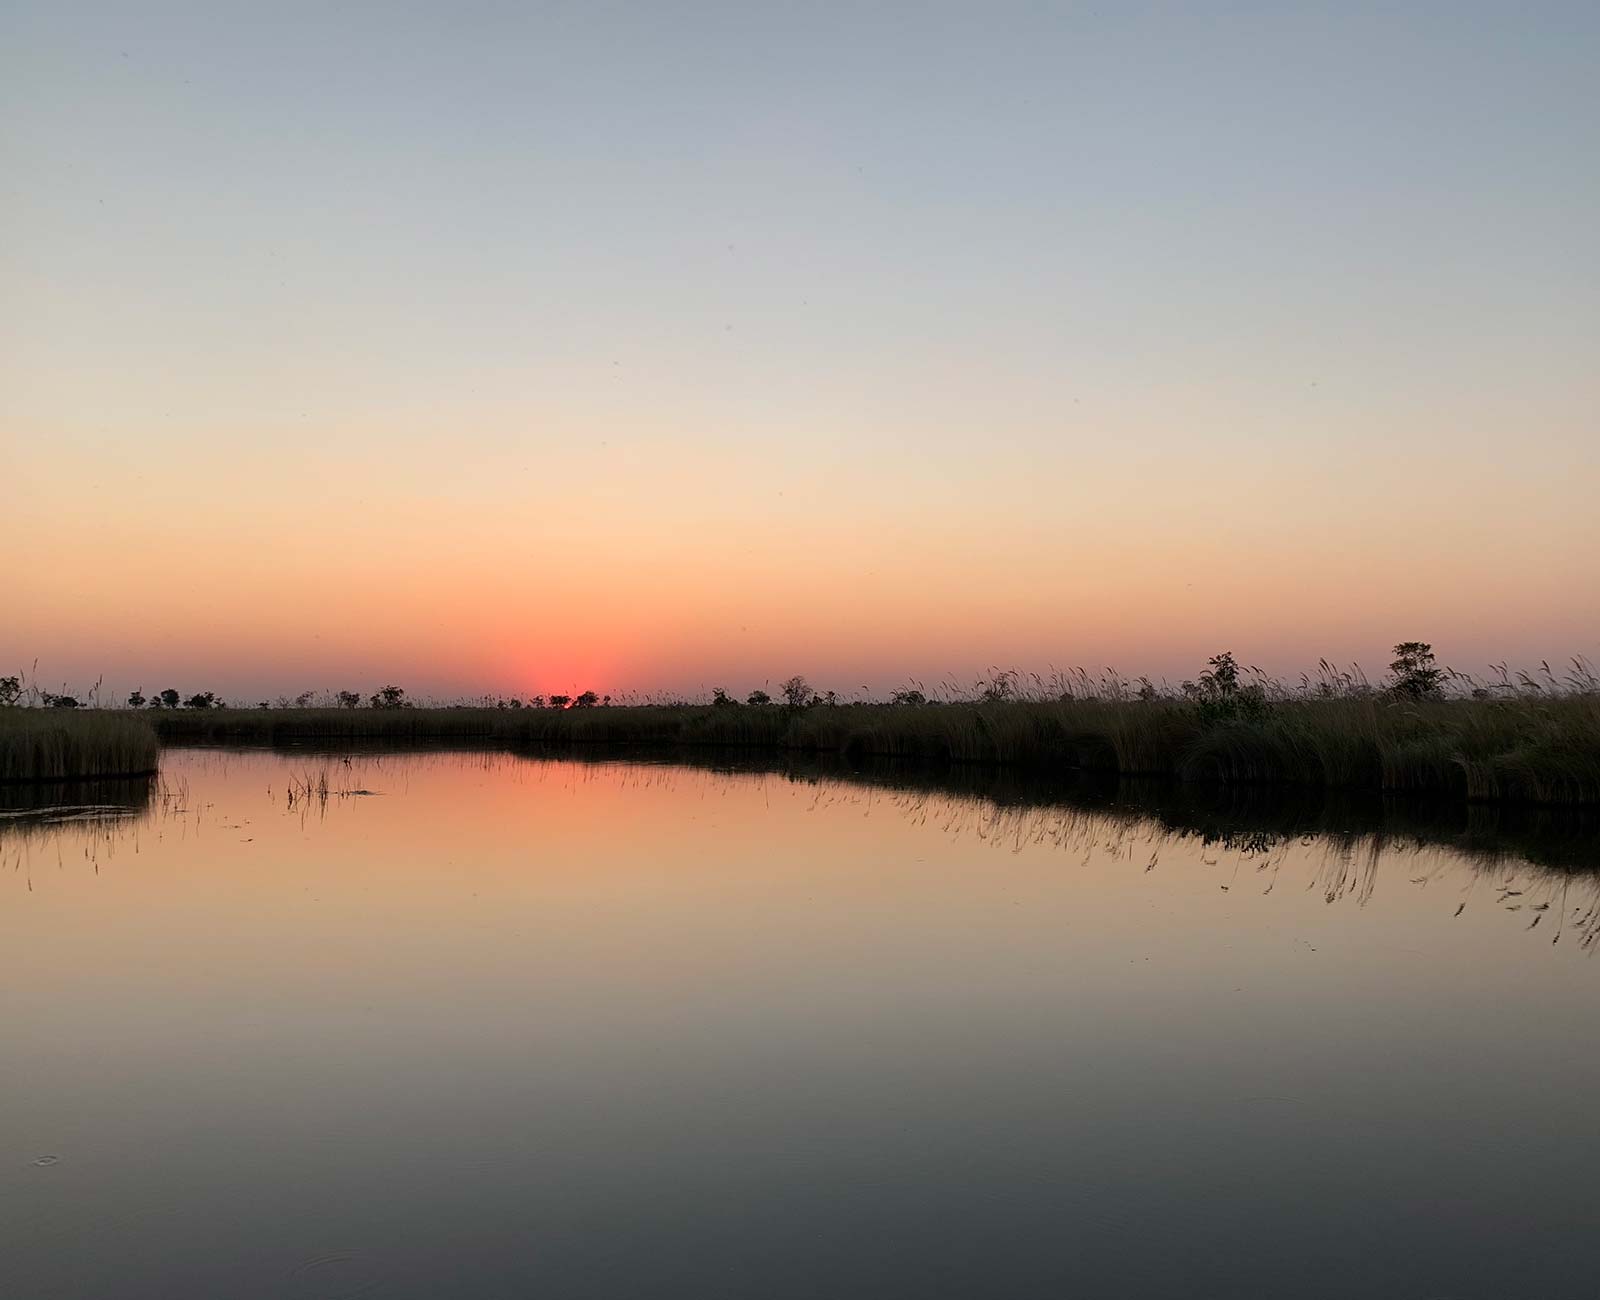 Sunset at game reserve in Botswana, Africa. Sh*ting next to an elephant